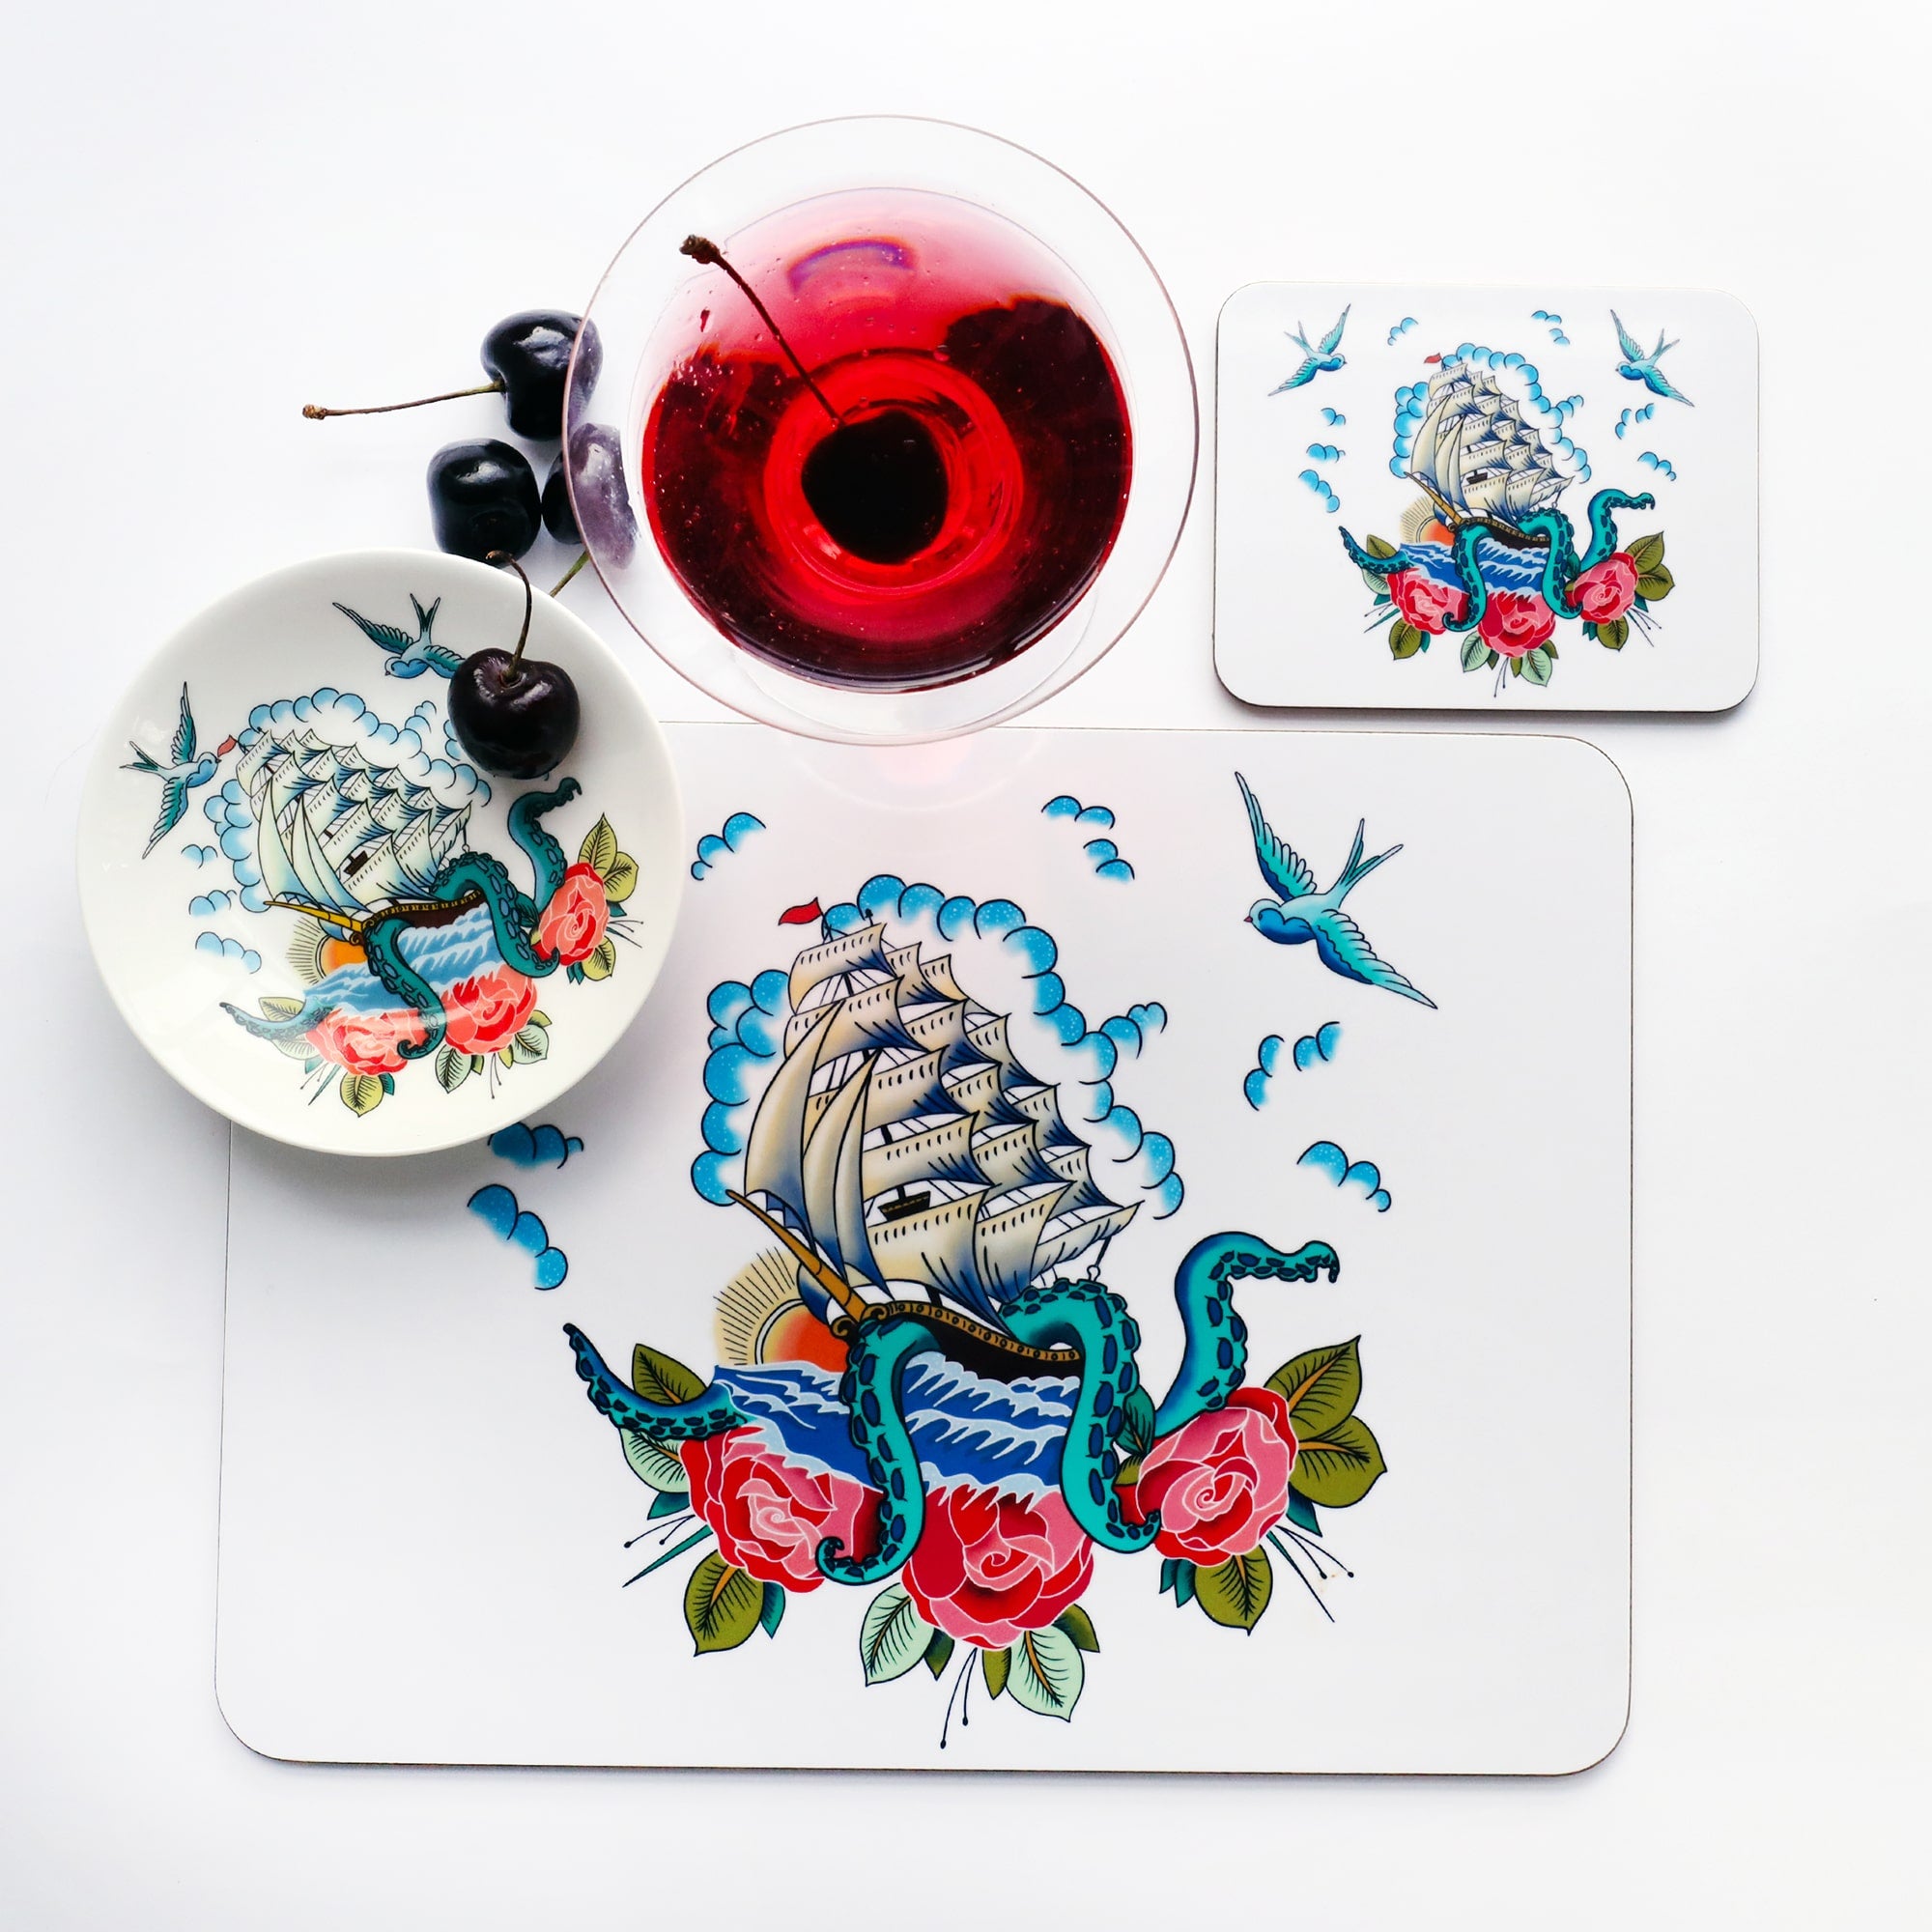 Place setting with placemat, coaster and nibbles dish all the the same ship, kraken and roses design that is inspired by a sailor's tattoos. The place setting is shot from above and there is a red cocktail and cherries just above the placemat.